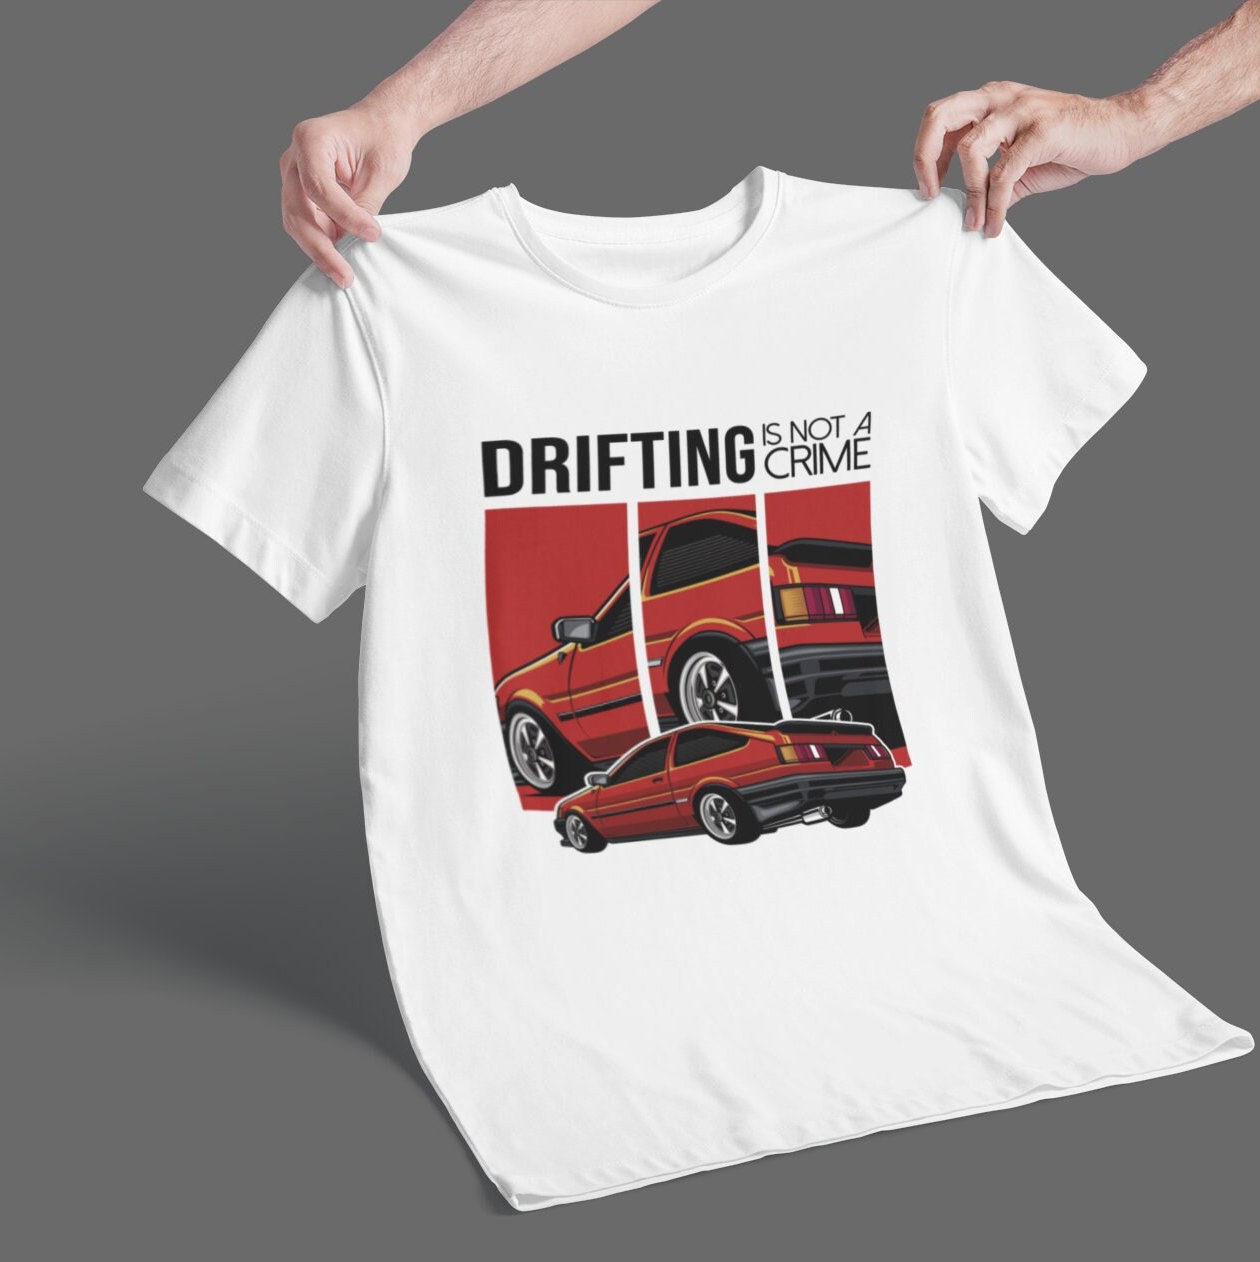 Best of Drifting shirt comes off